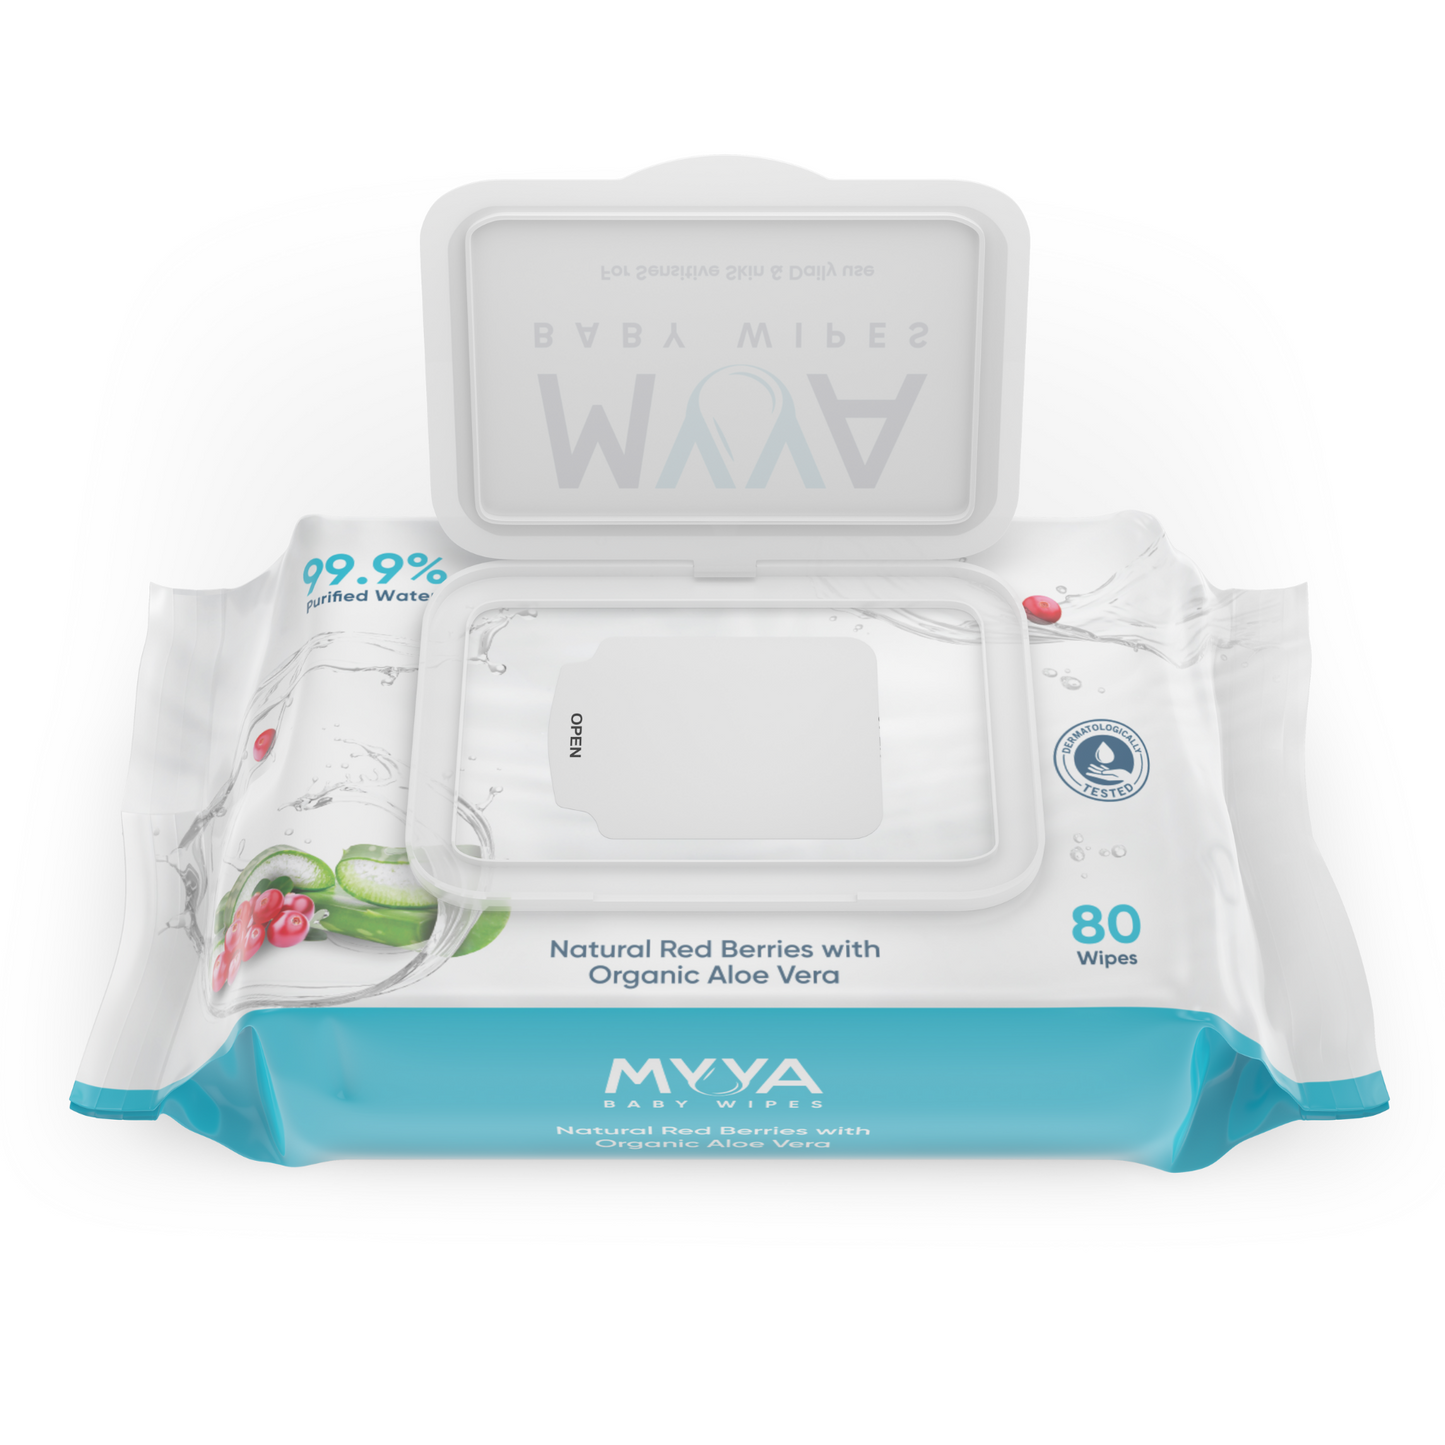 80 Count Myya Baby Wipes: Safe and Soothing Skincare